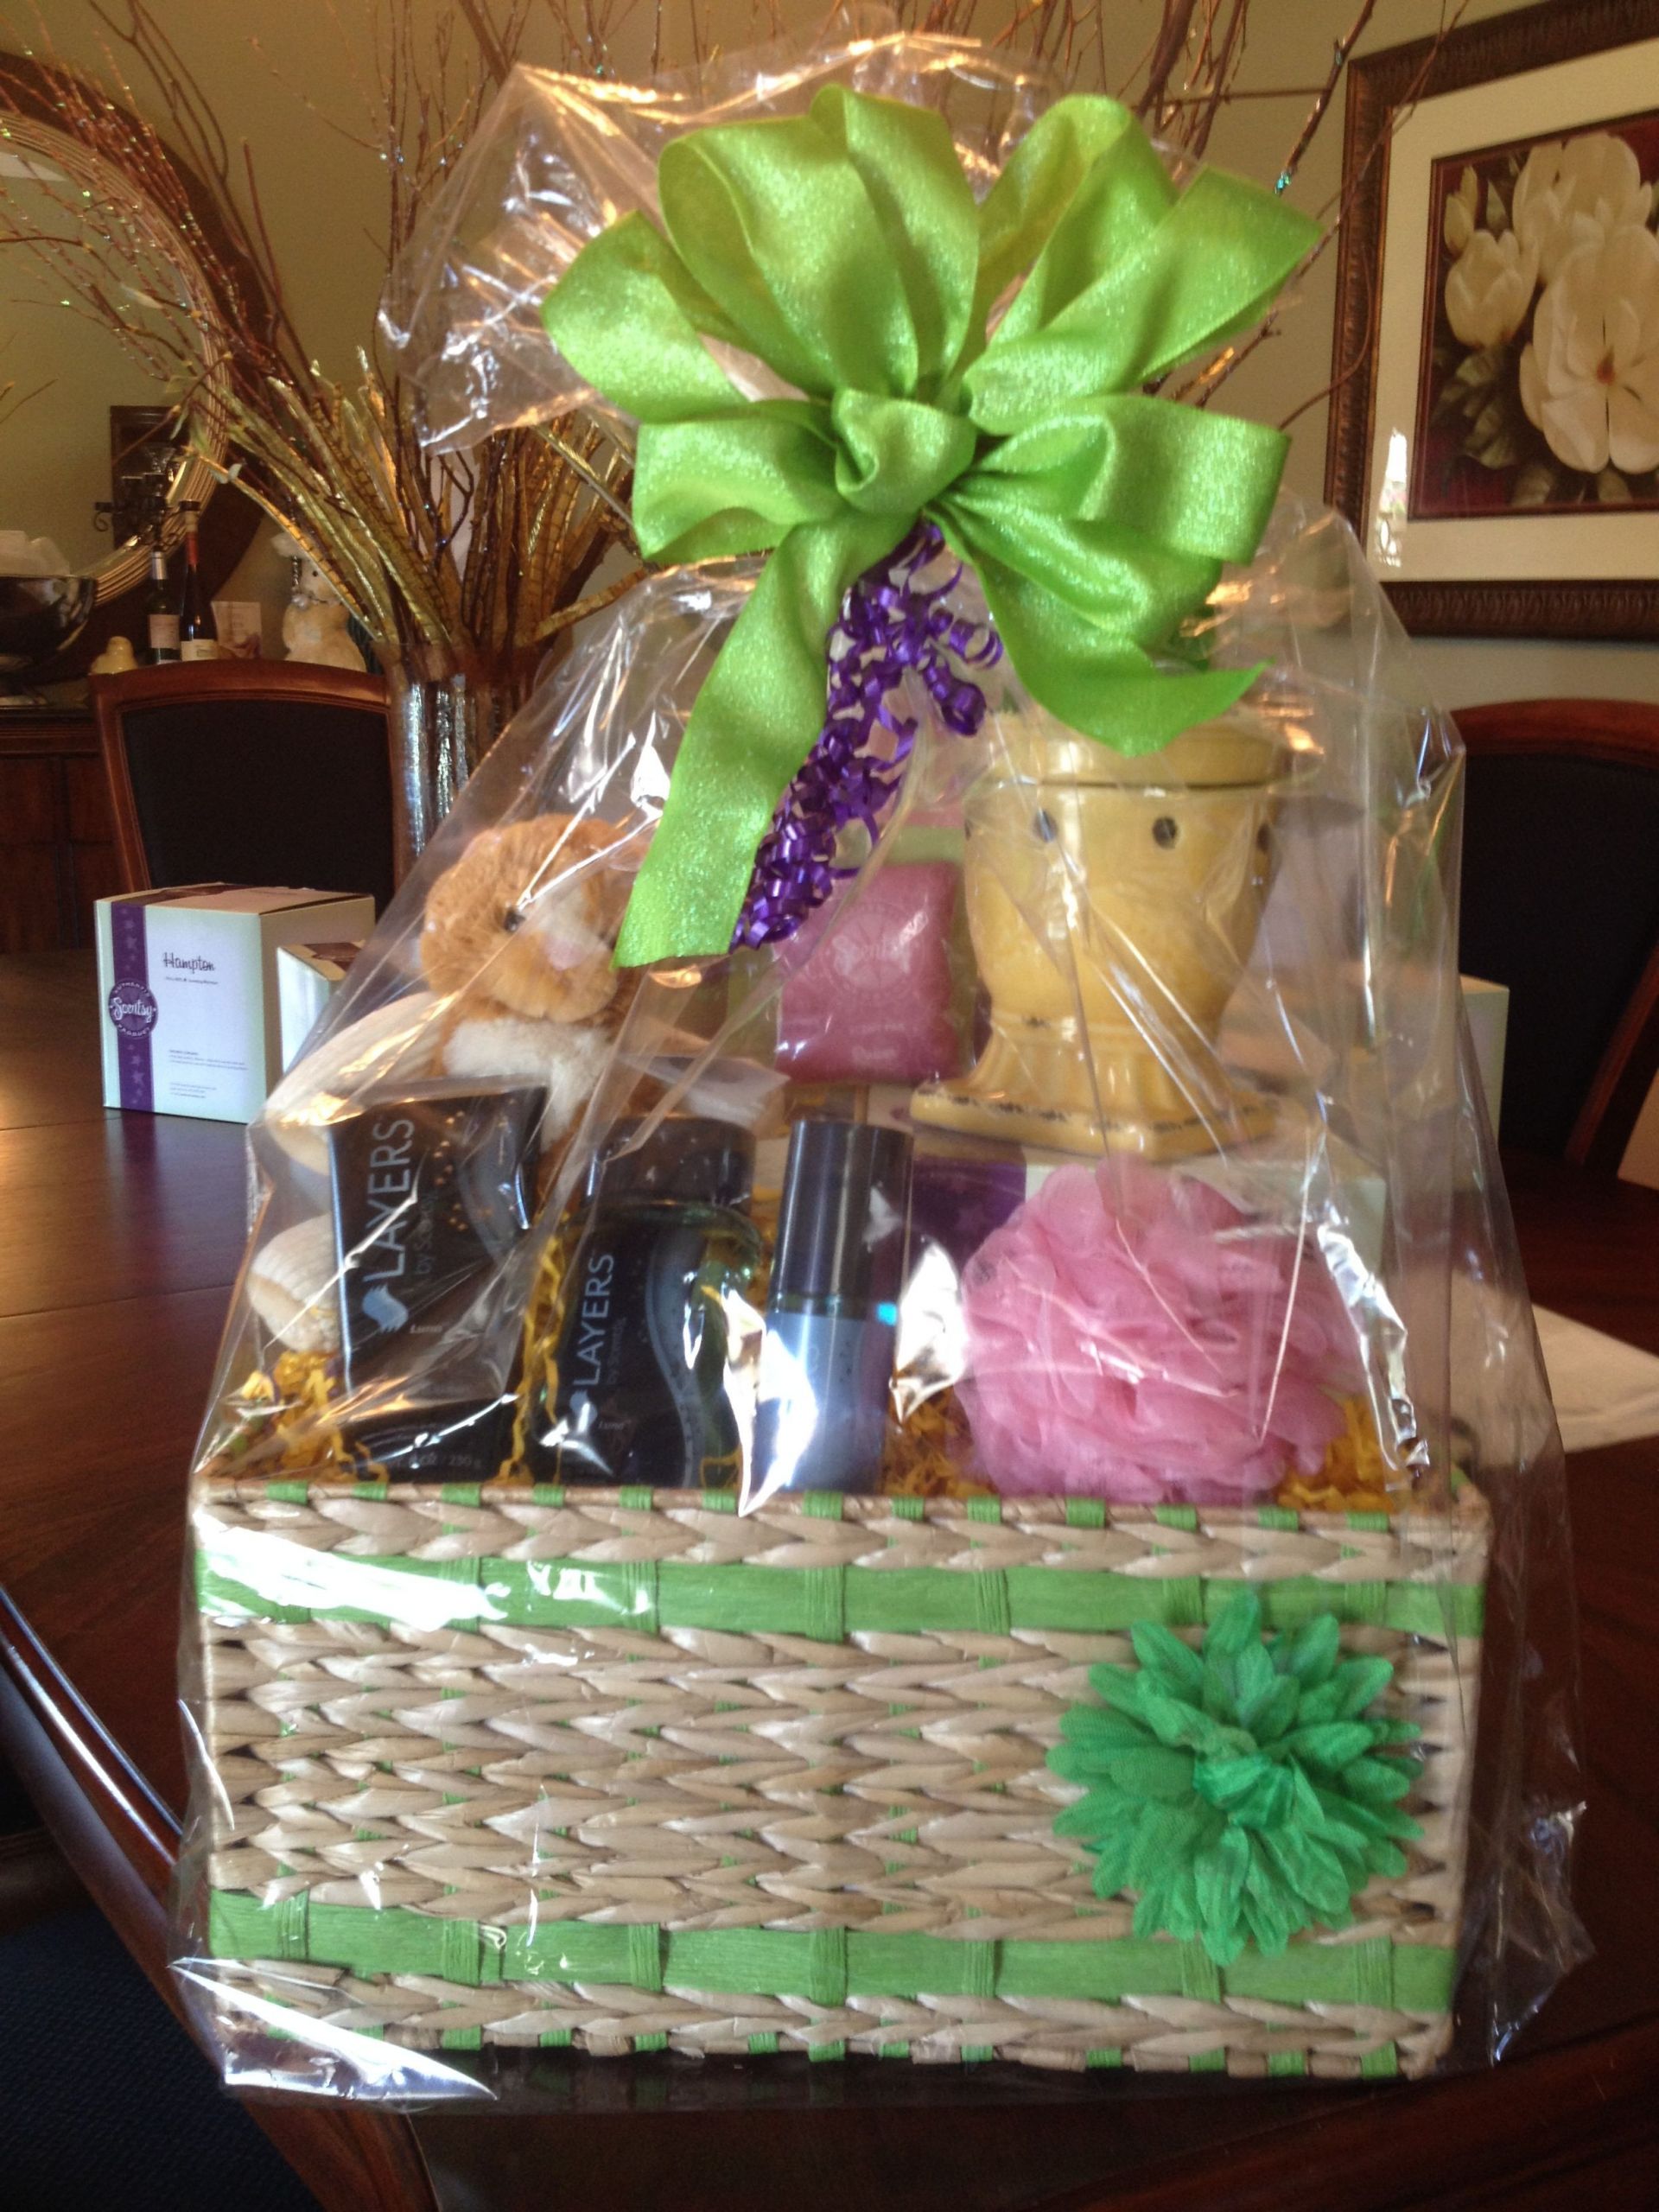 Gift Basket Ideas For Fundraisers
 So proud of my creation Fundraiser basket